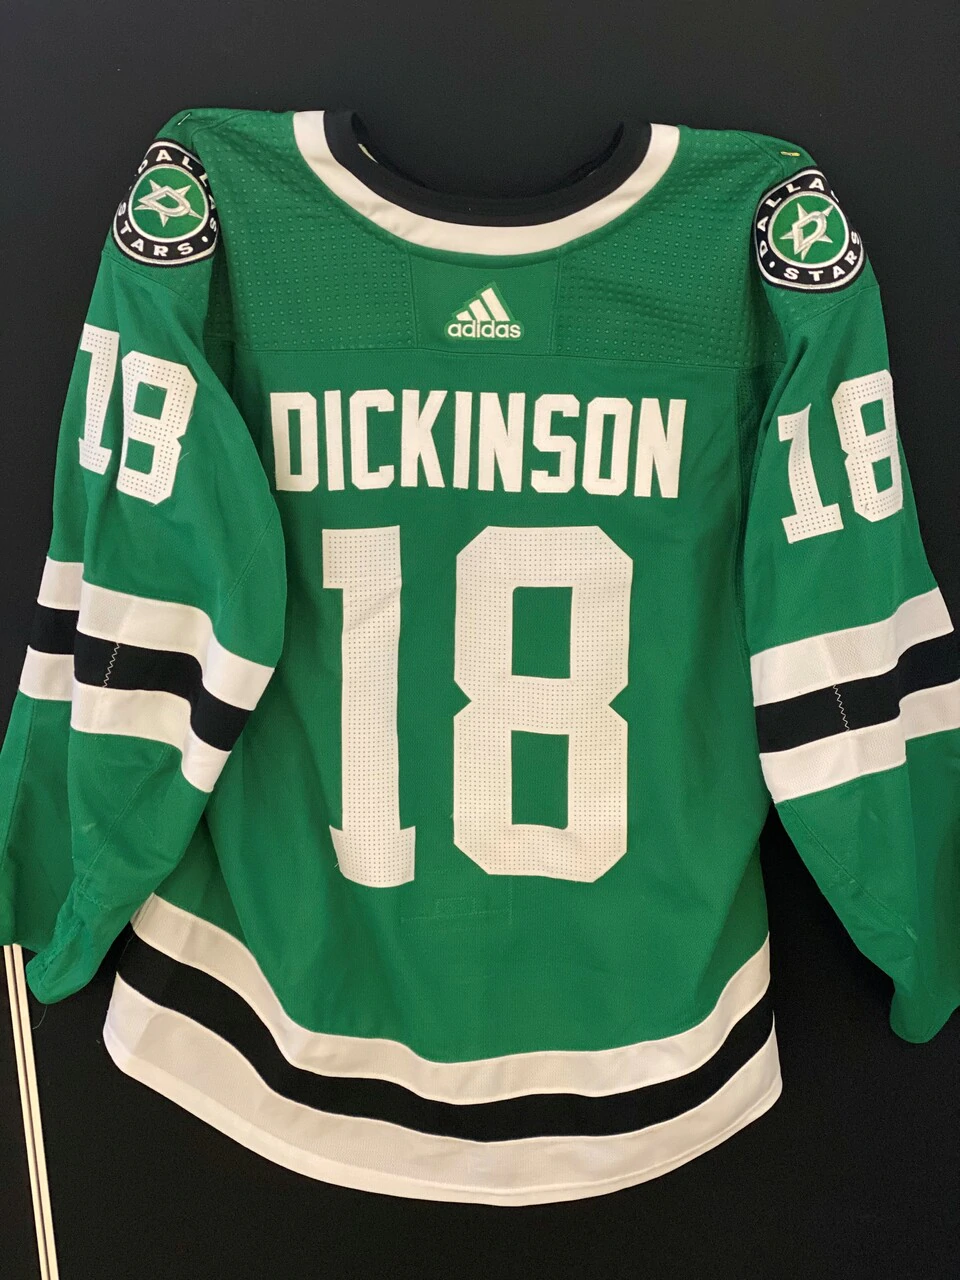 Jason Dickinson 19/20 Game Worn Home Jersey - Set 3 in Green - Back View